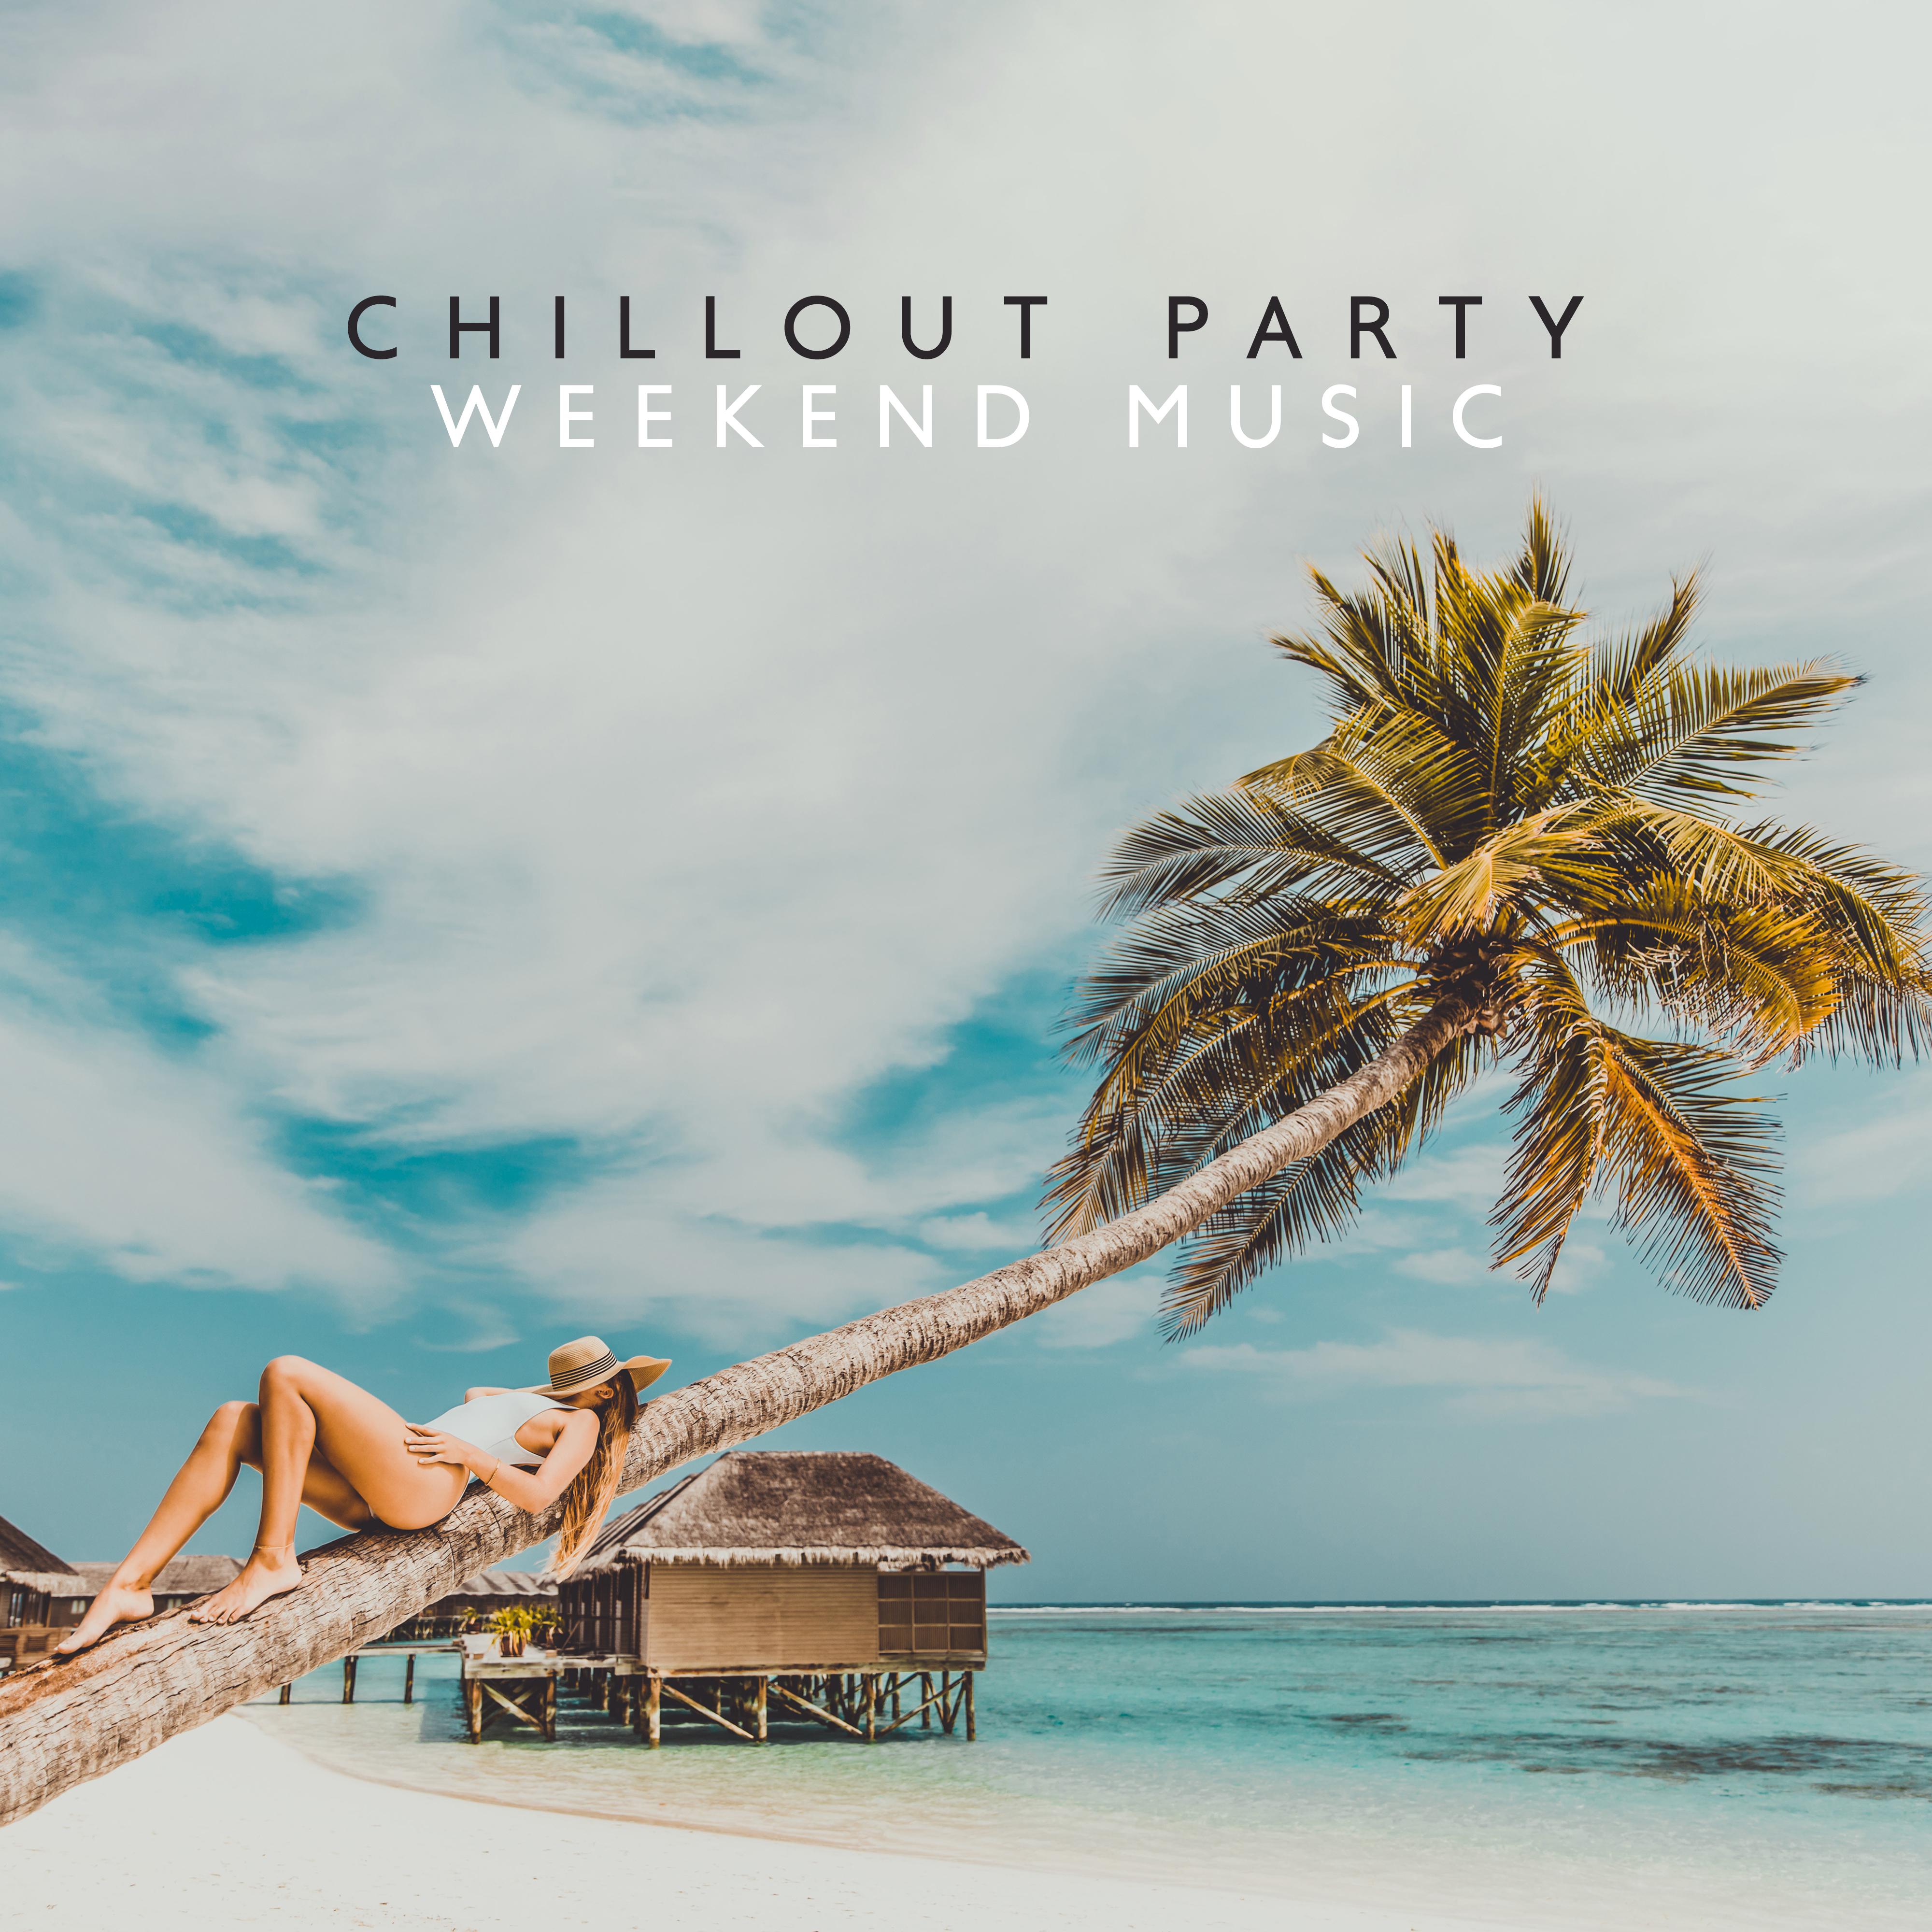 Chillout Party Weekend Music